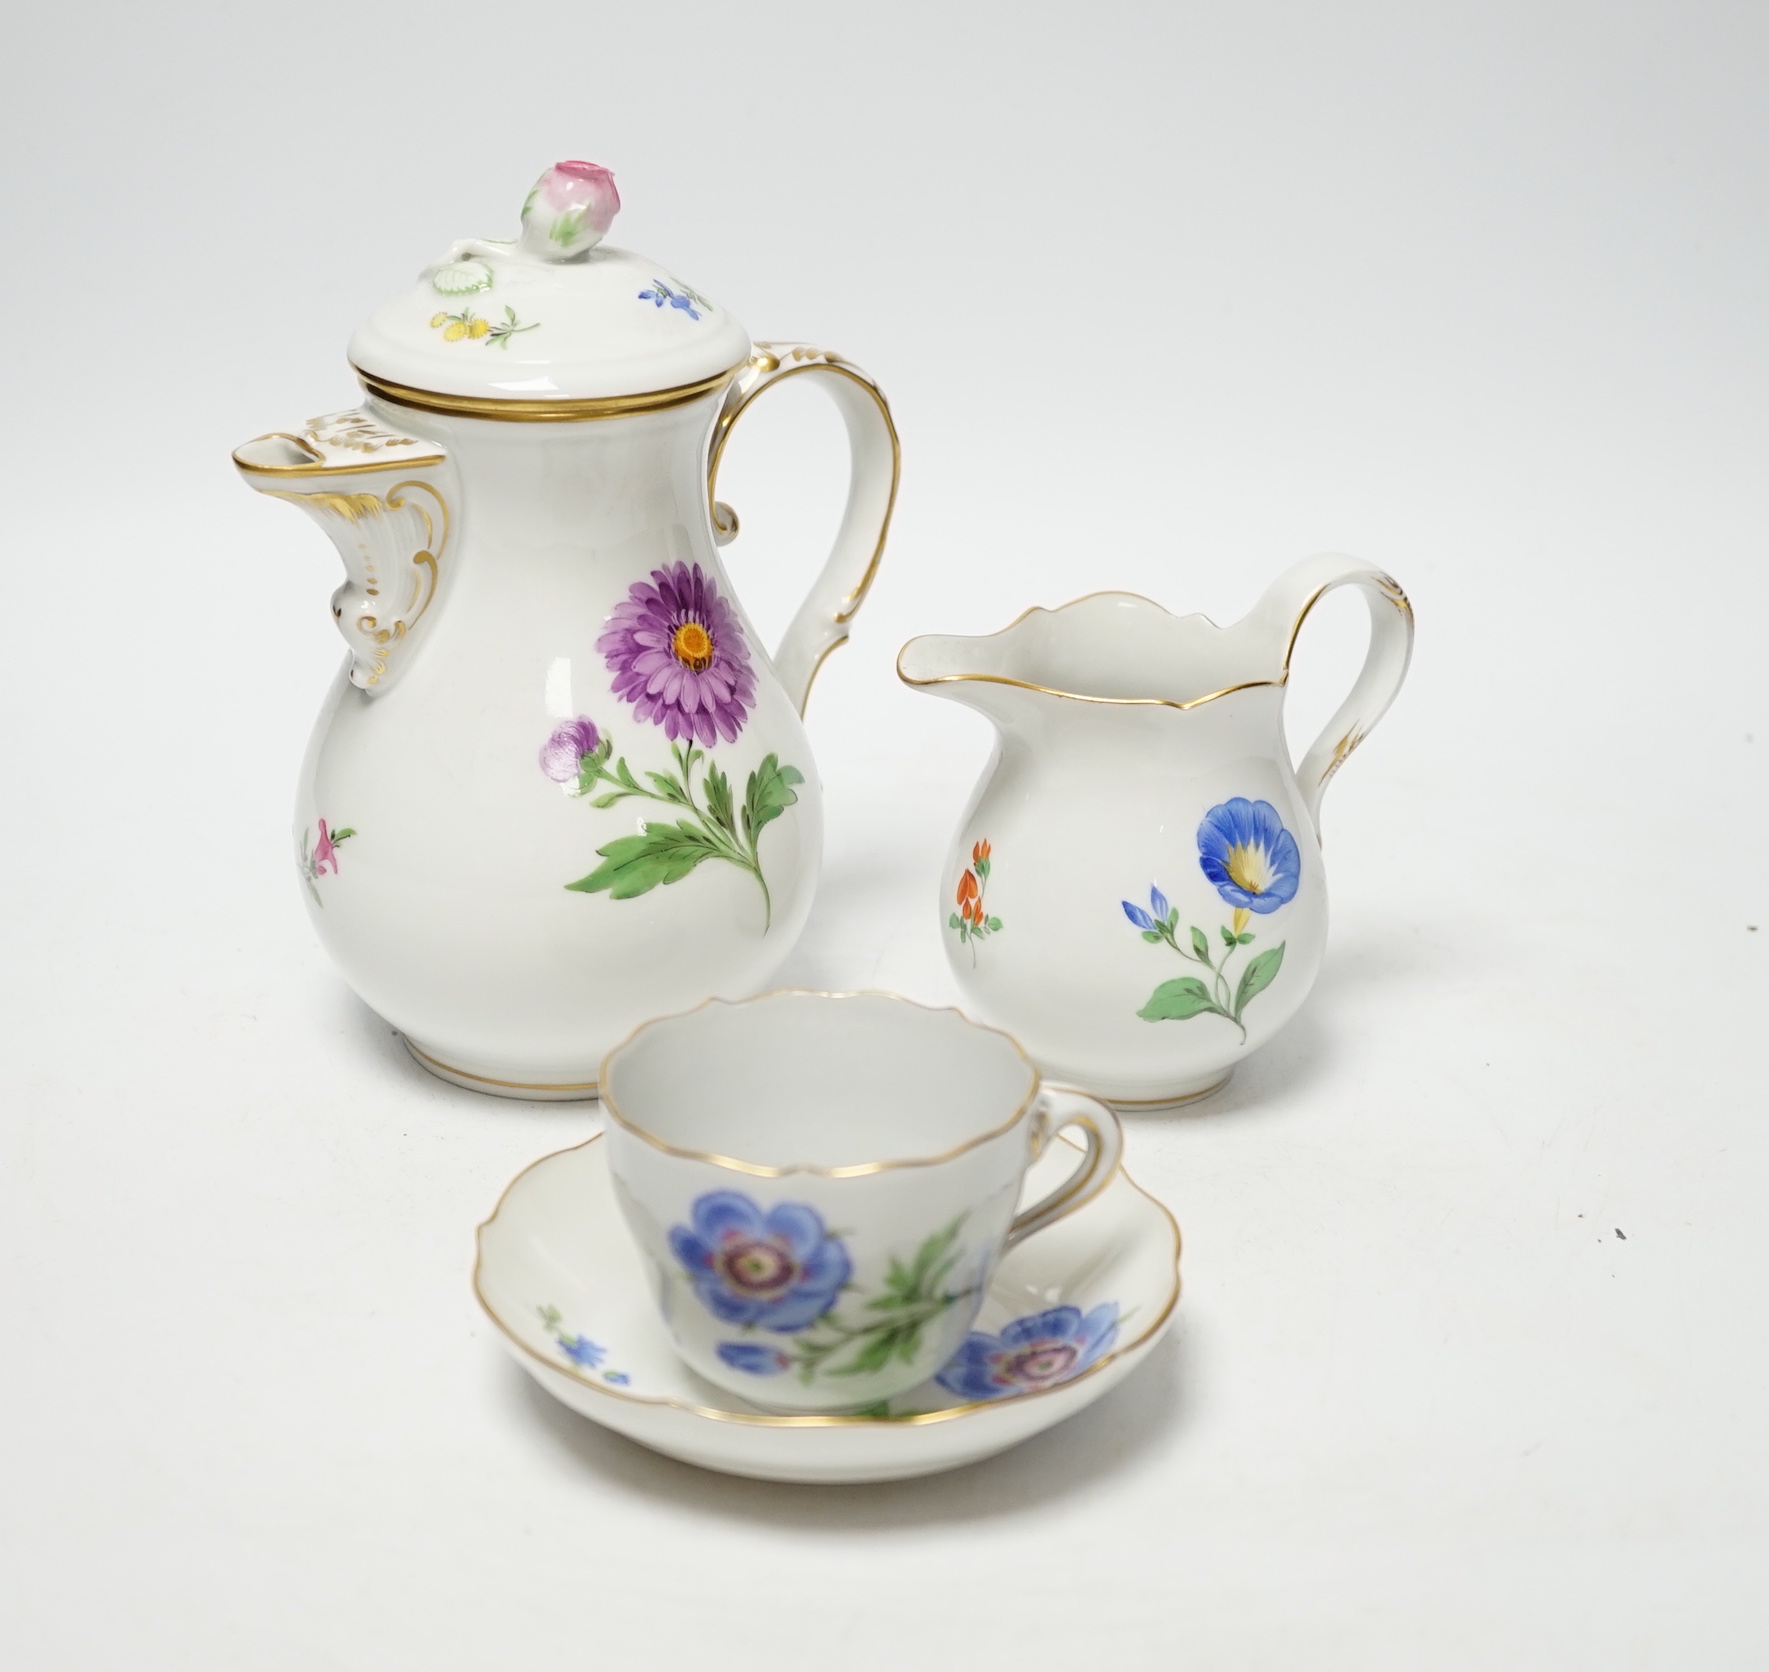 A 20th century Meissen coffee set with floral decoration, comprising a coffee pot, a milk jug, a lidded sugar bowl, and six cups and saucers, coffee pot, 17cm high